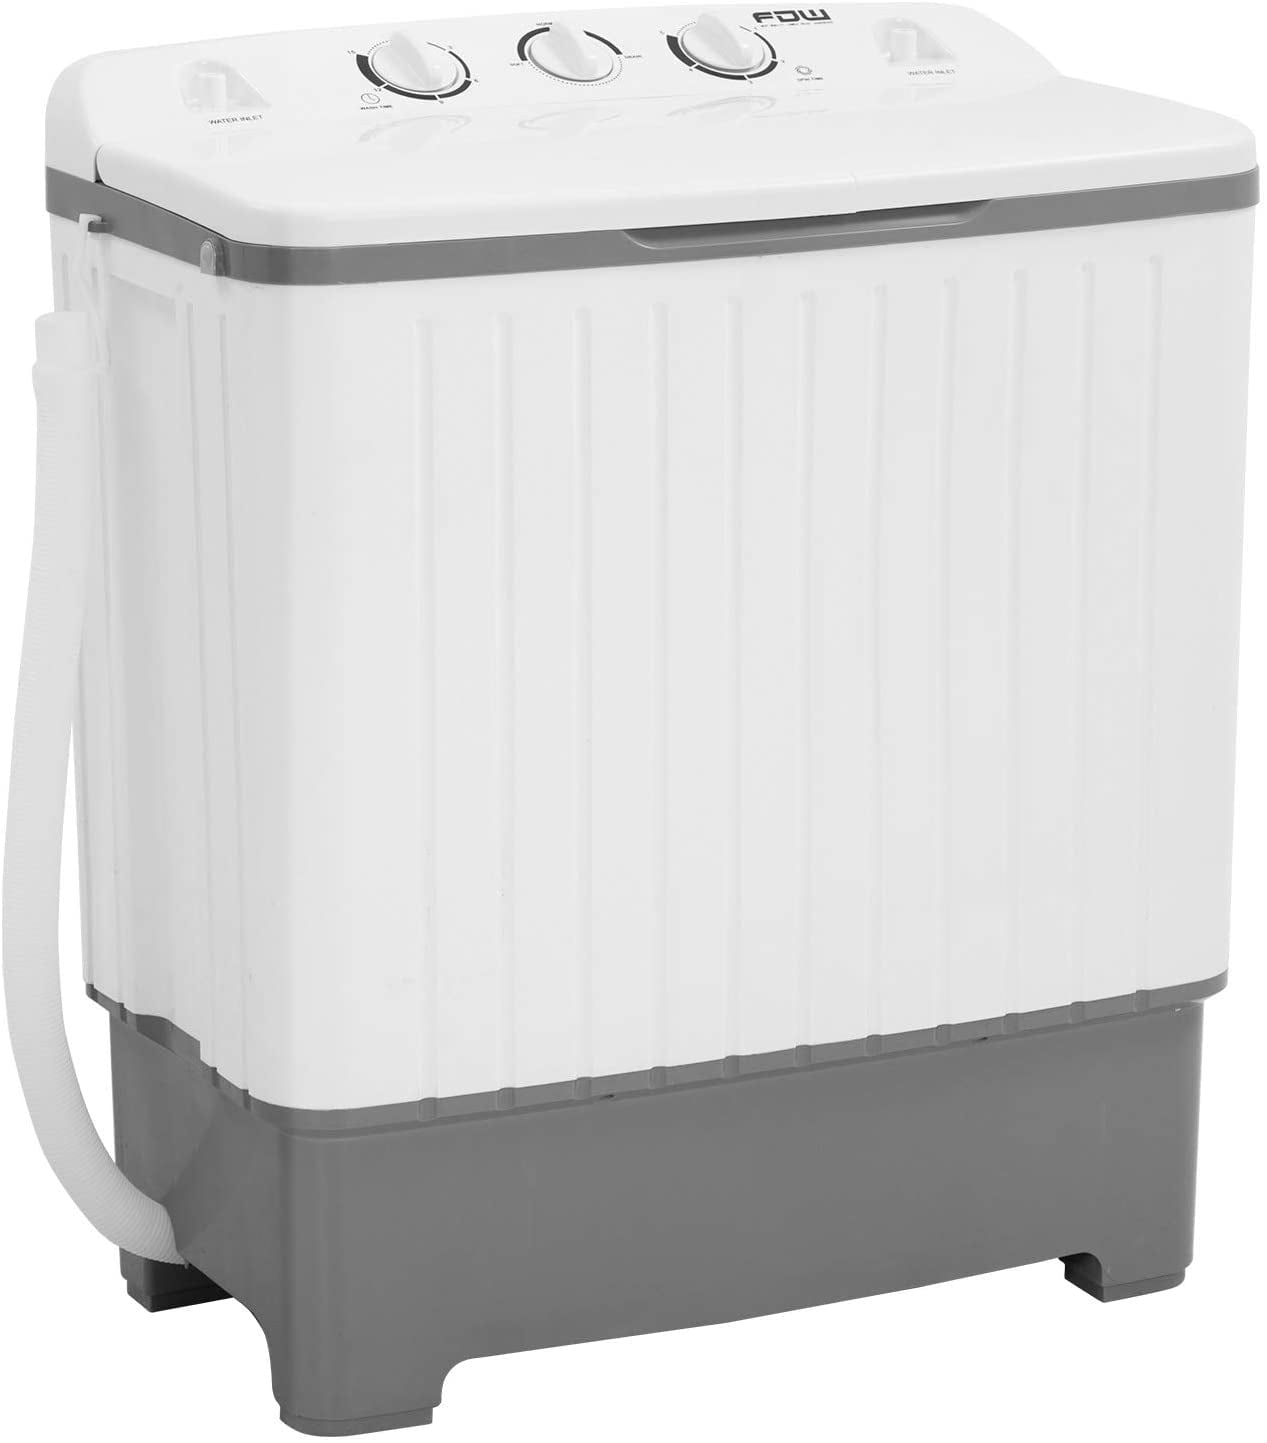 Portable Washer And Dryer Combo For Apartments